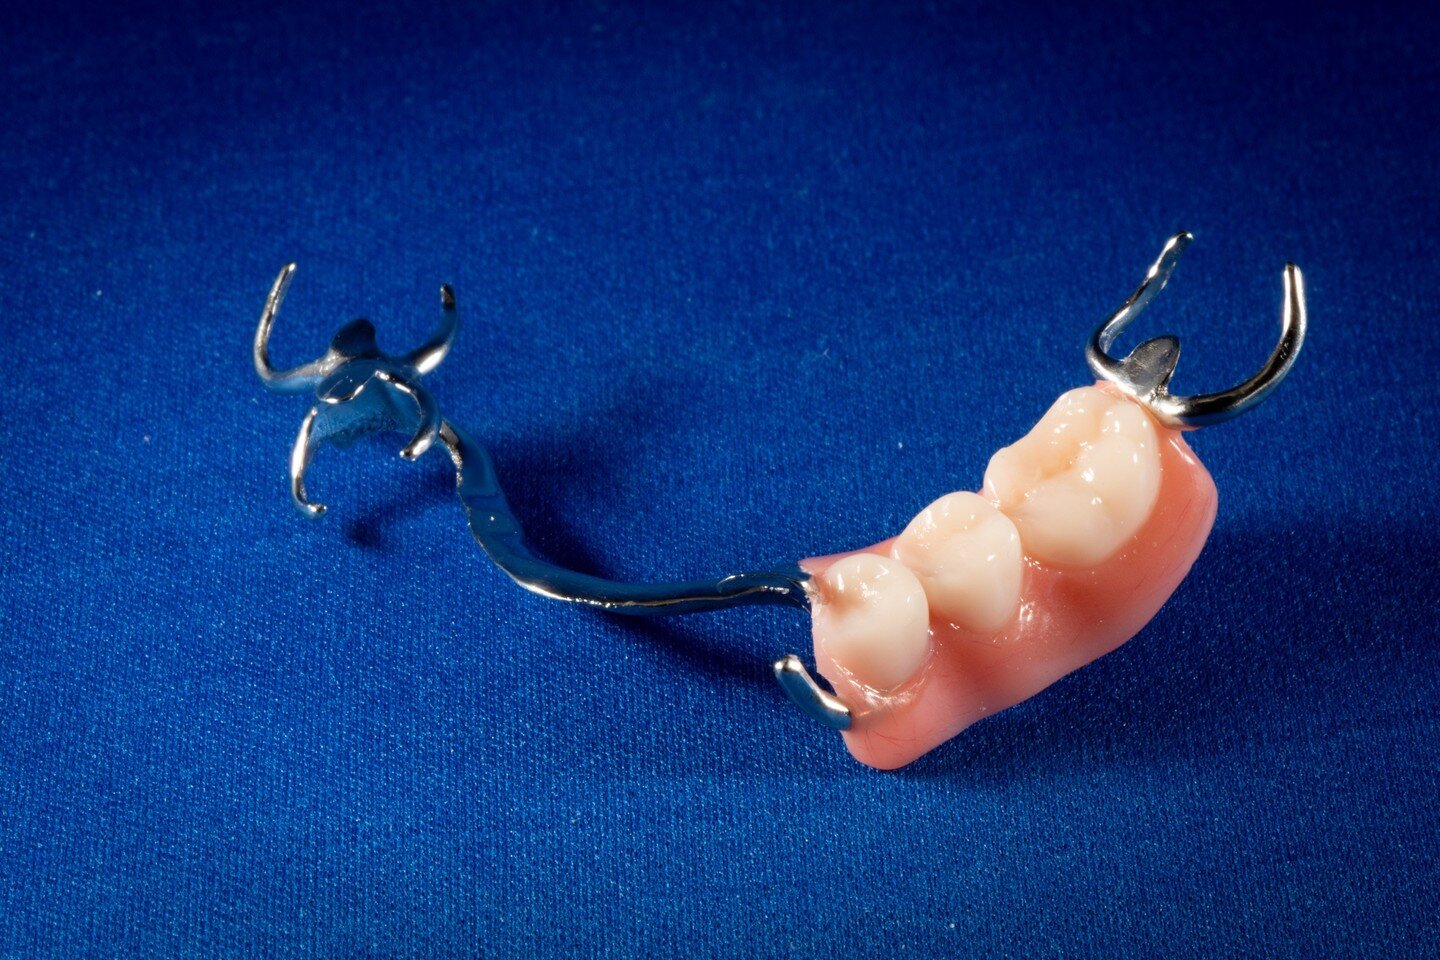 The removable partial denture is a workhorse of dental prostheses.  The metal backbone gives it strength and stability to restore missing teeth without much impact on surrounding tissues.